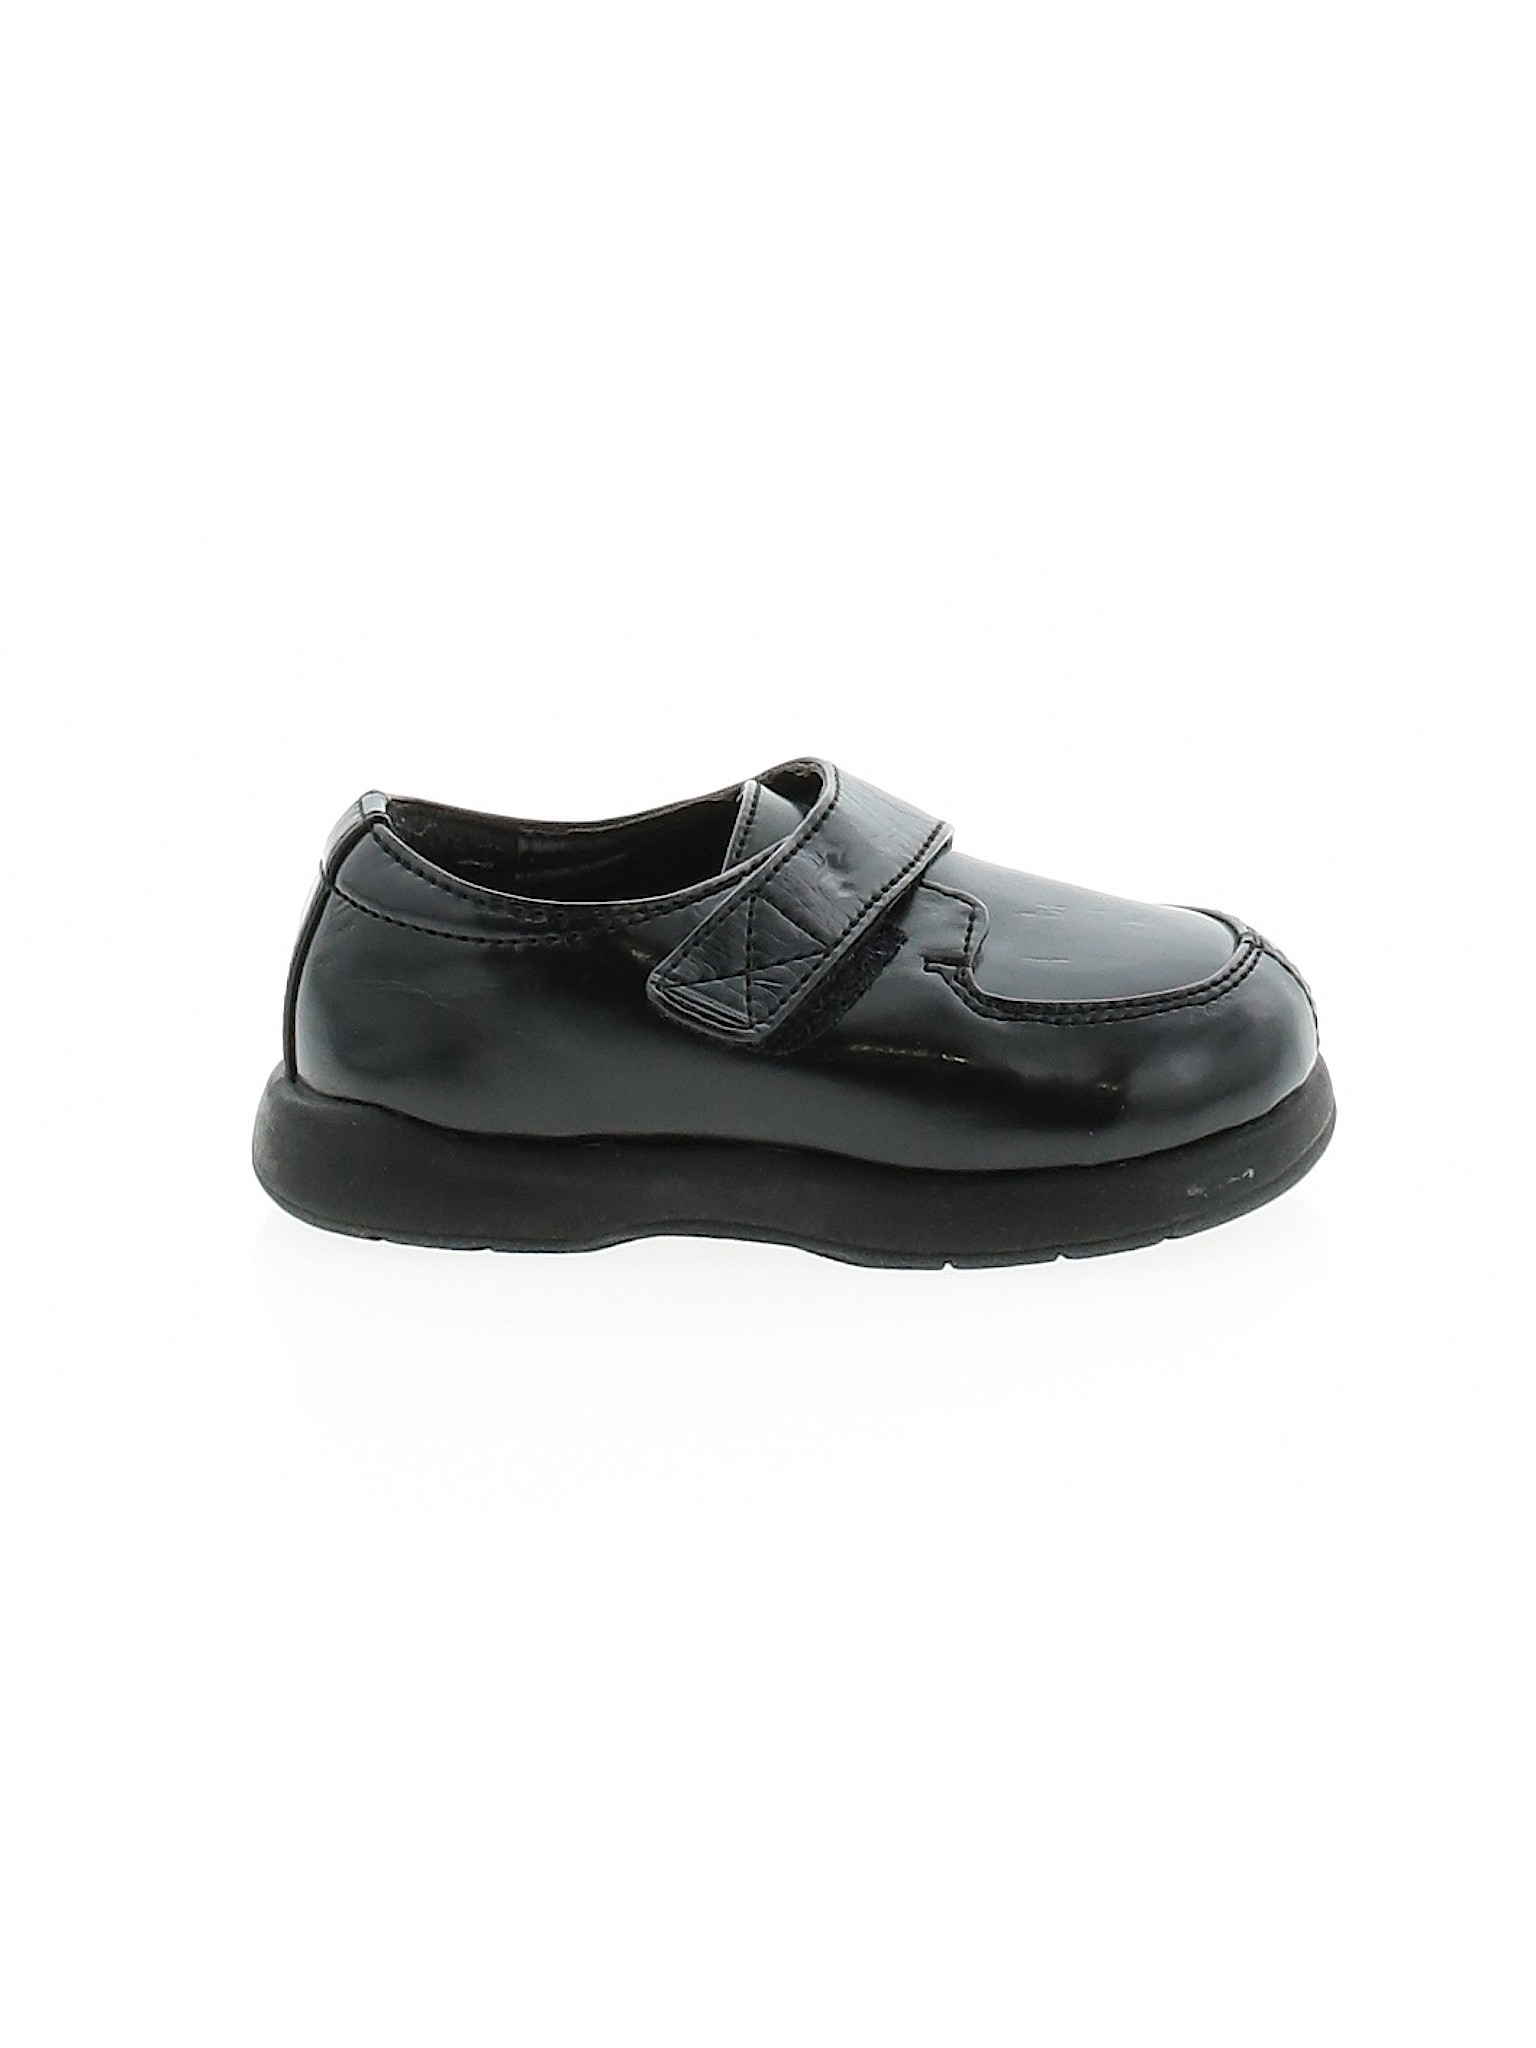 toddler casual dress shoes